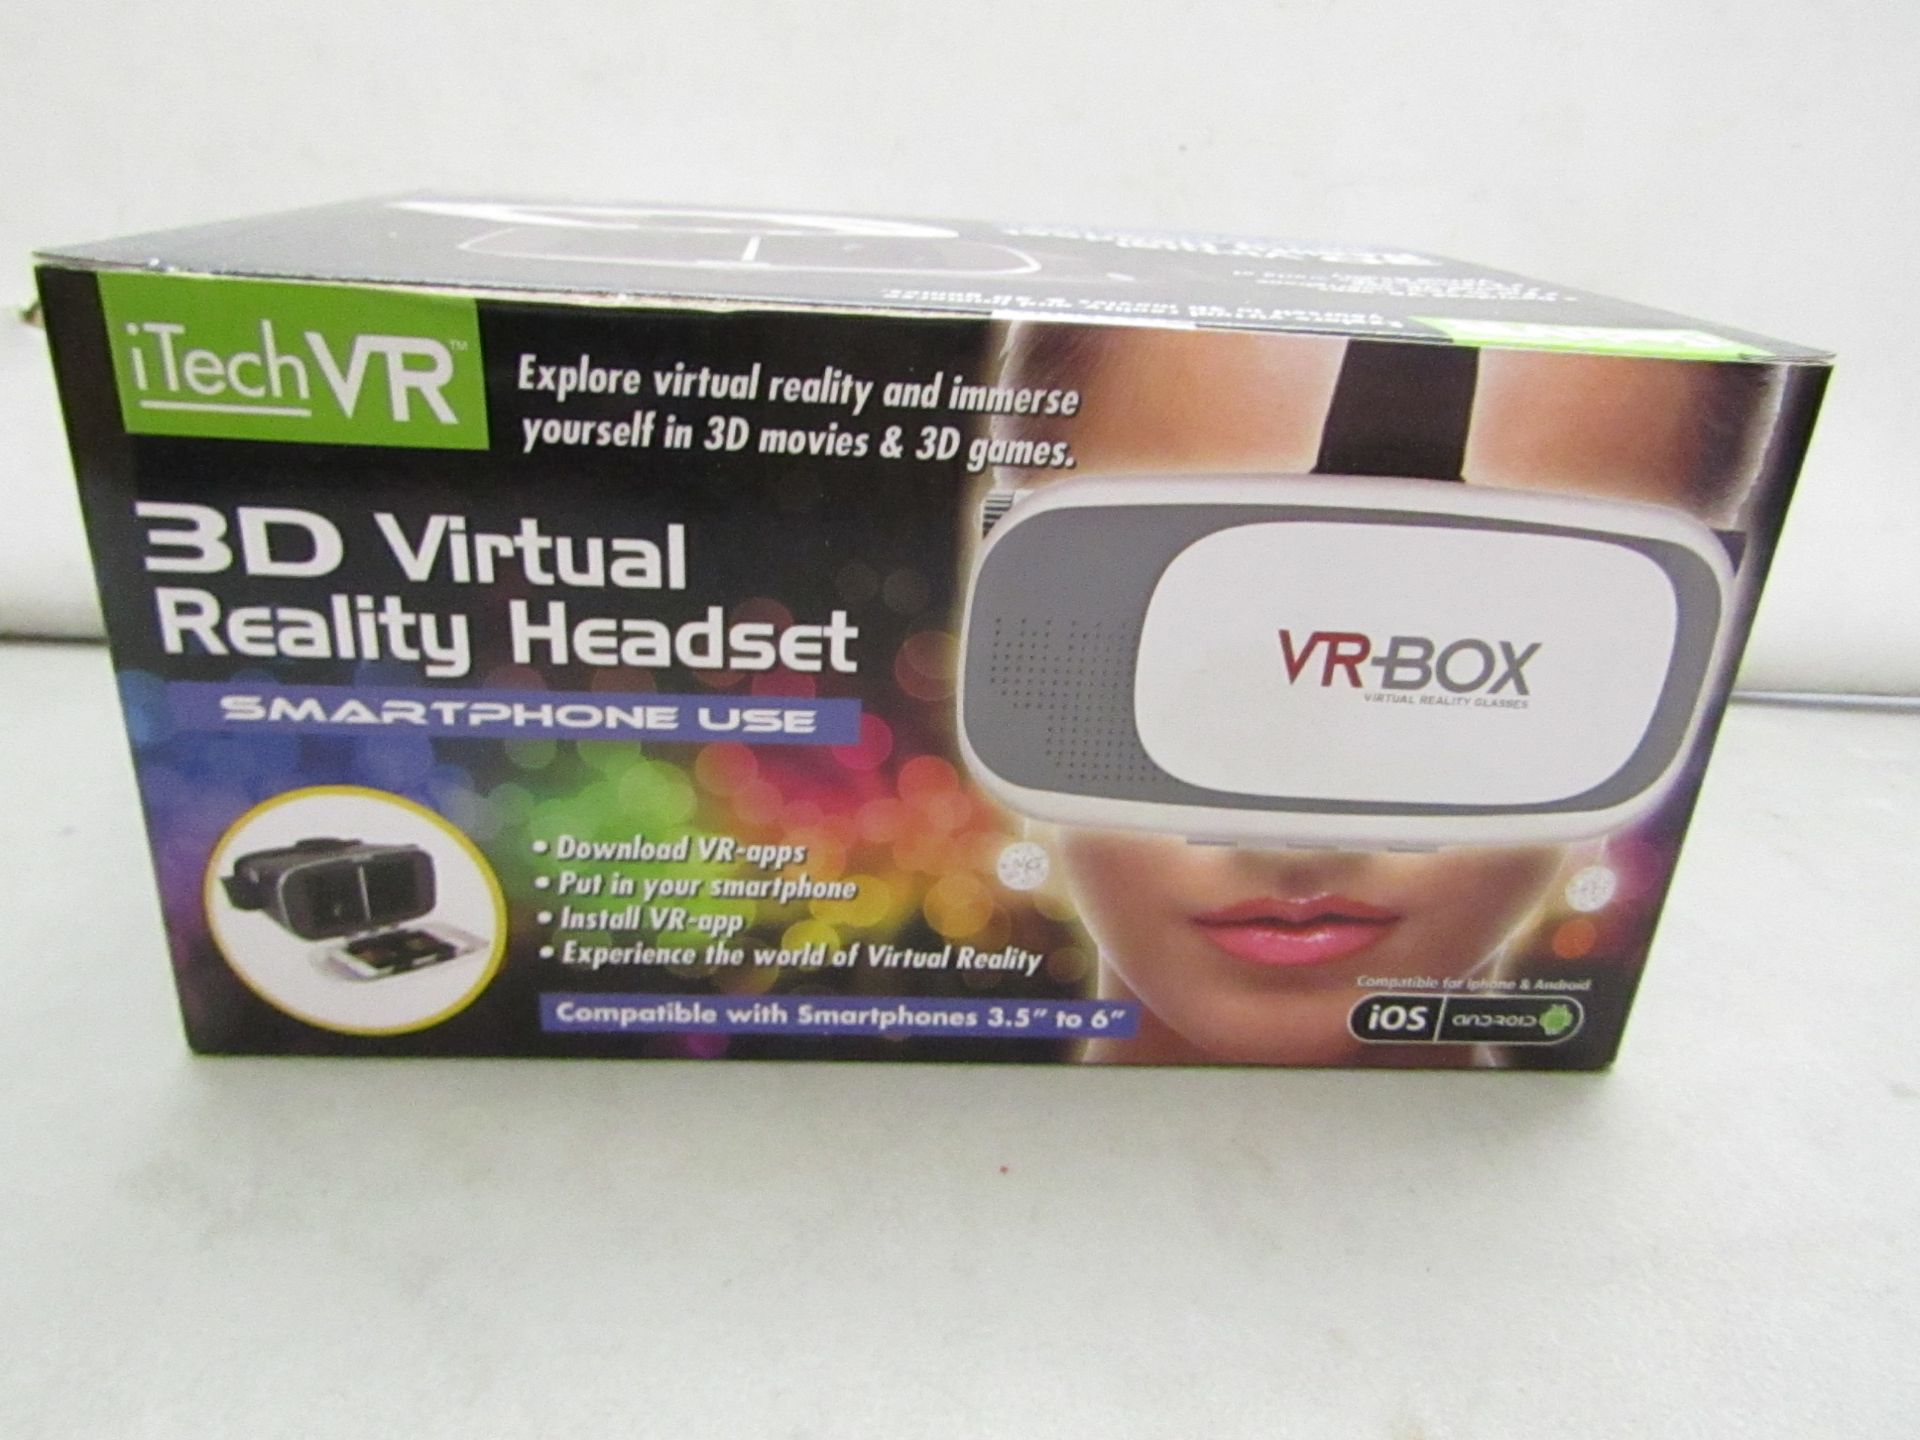 iTech VR 3D Virtual Reality headset ( smart phone use ) Boxed